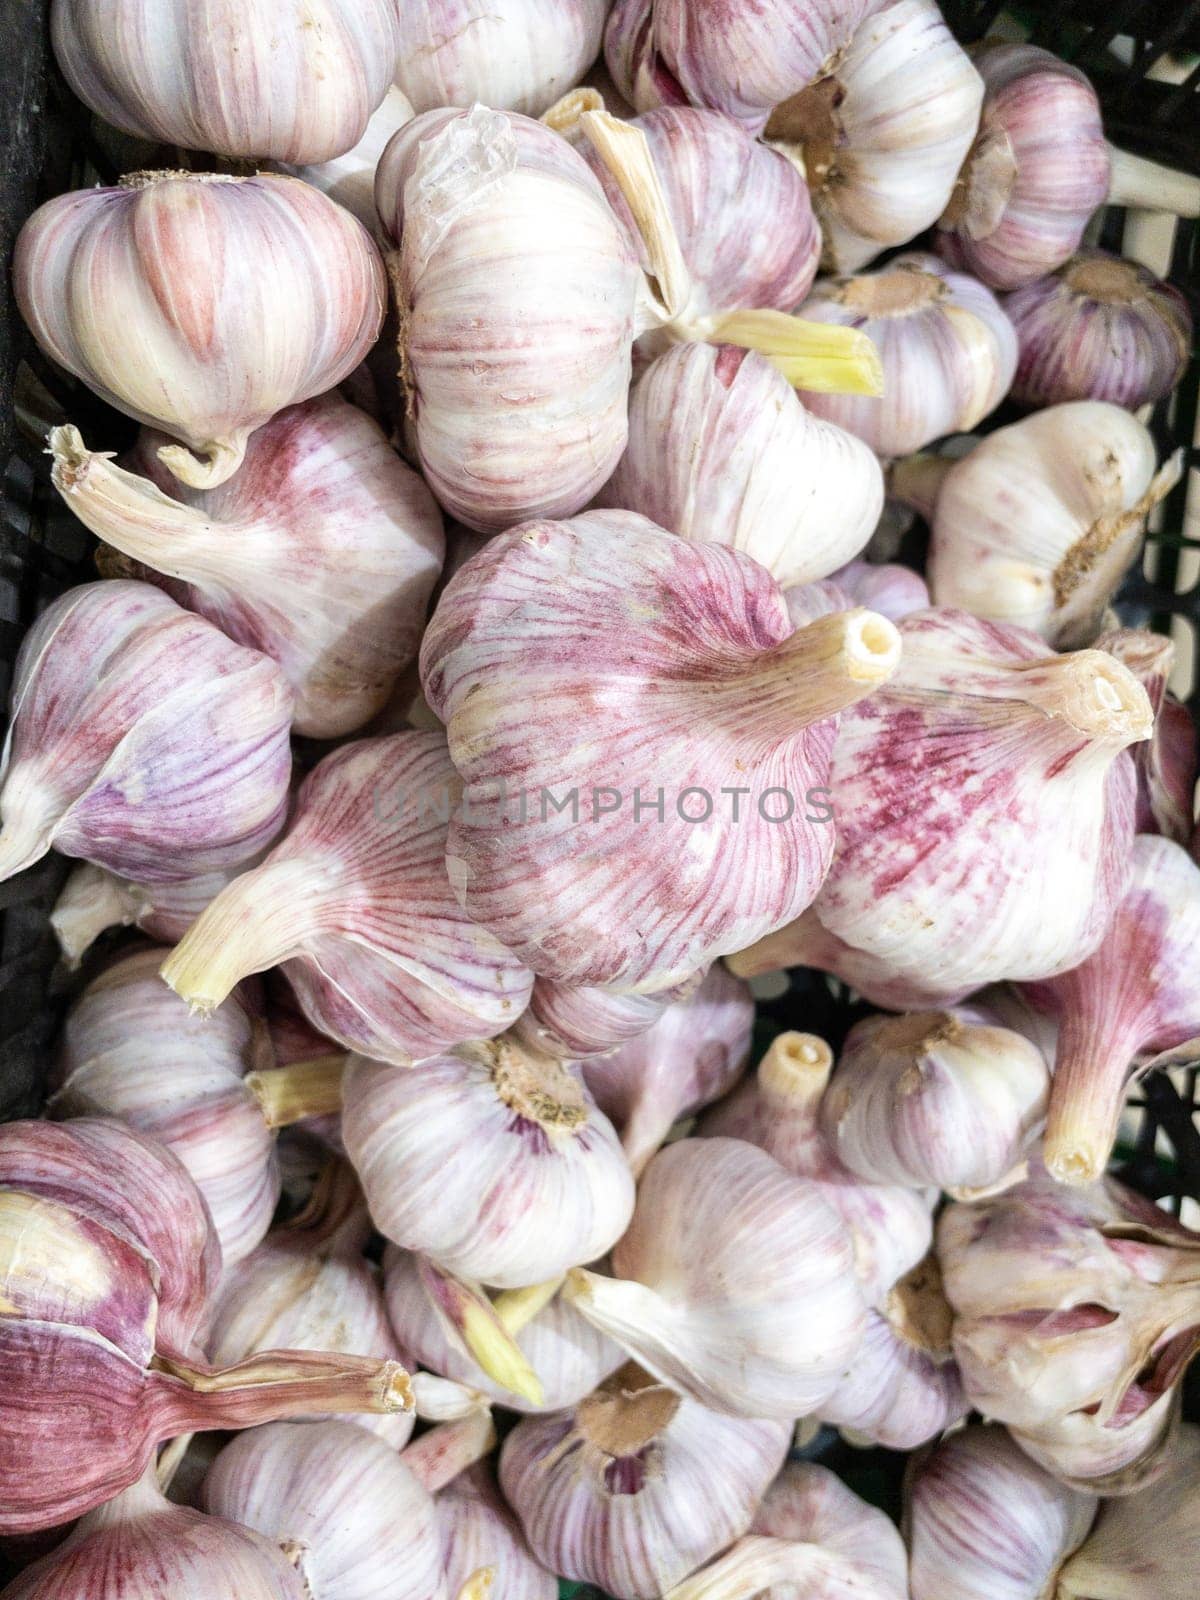 Garlic on showcase of grocery or market, raw vegetables in supermarket. Vertical photo by darksoul72